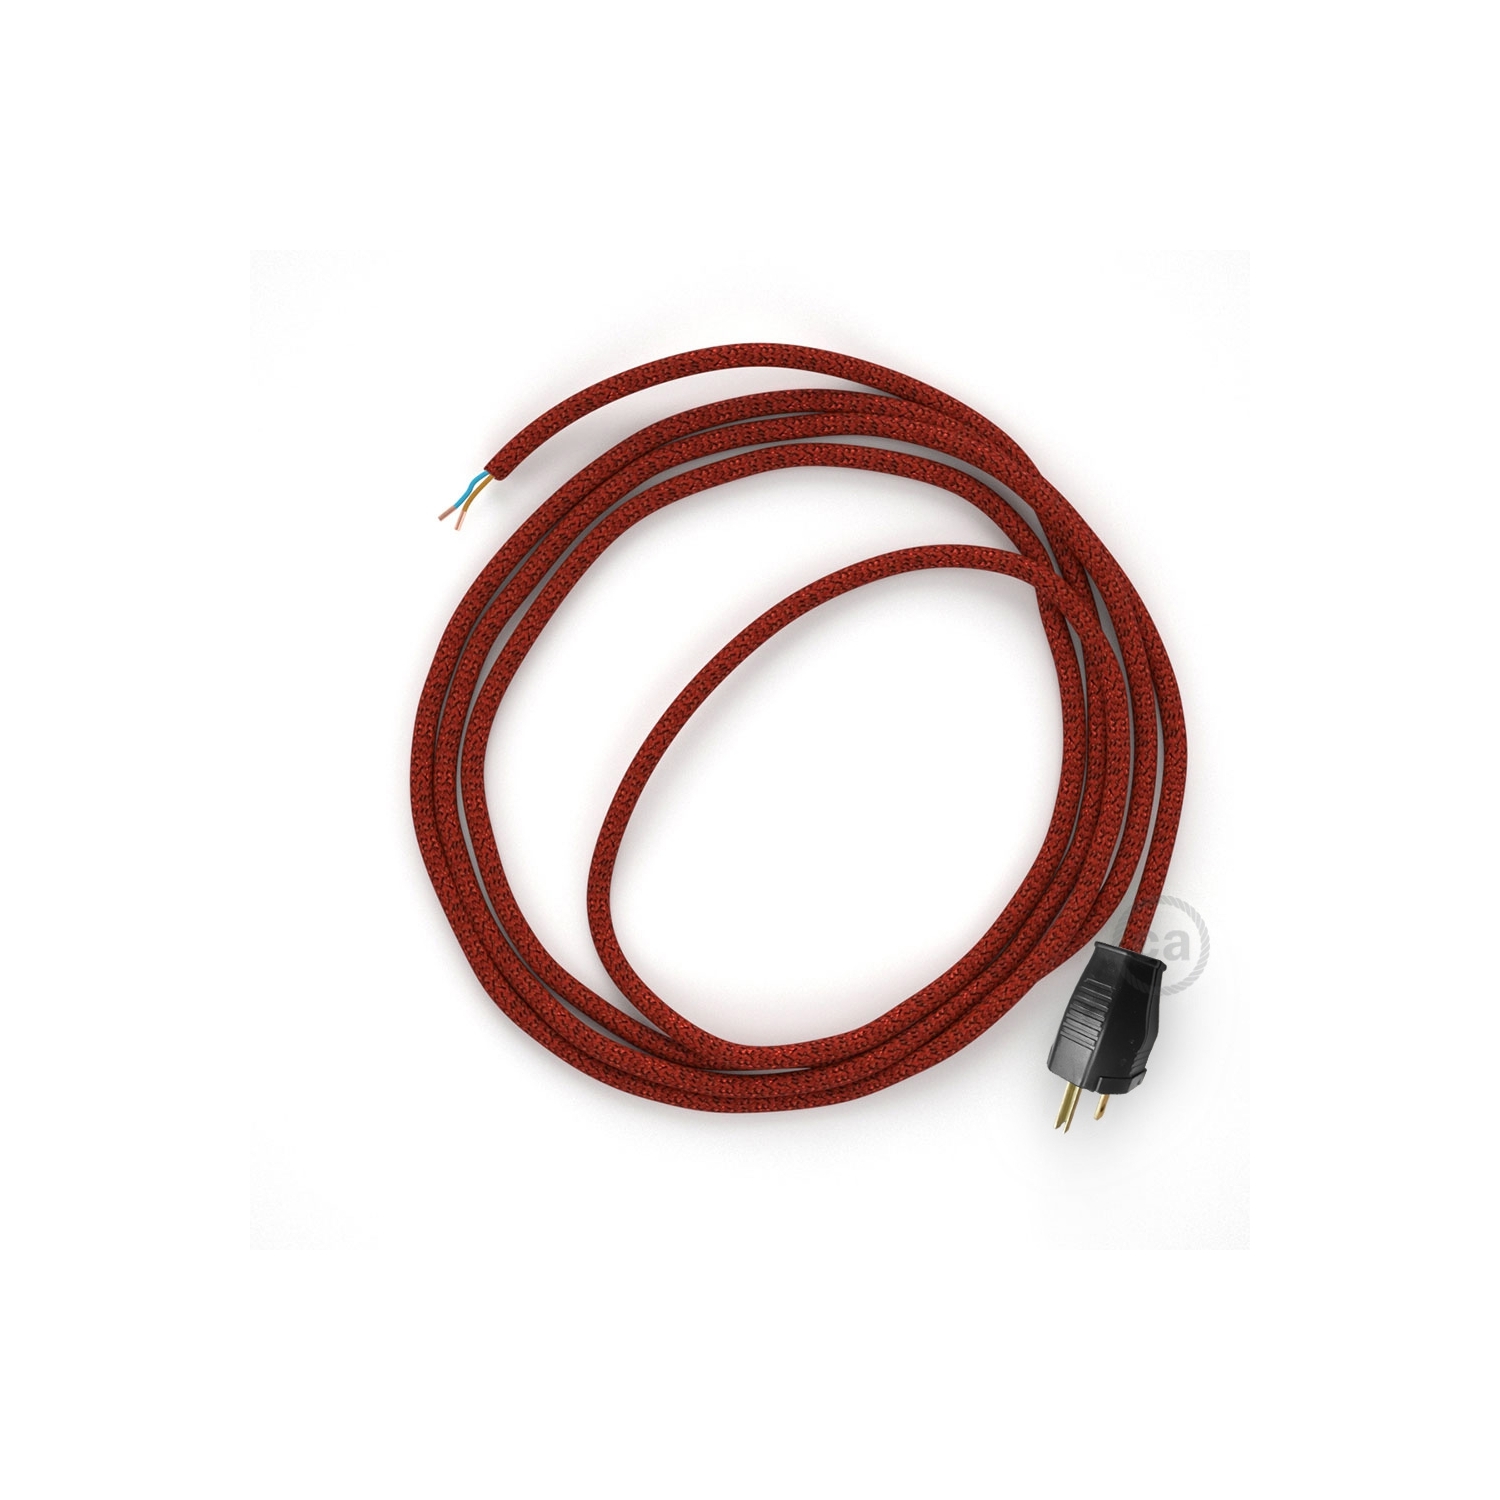 Cord-set - RL09 Red Glitter Covered Round Cable